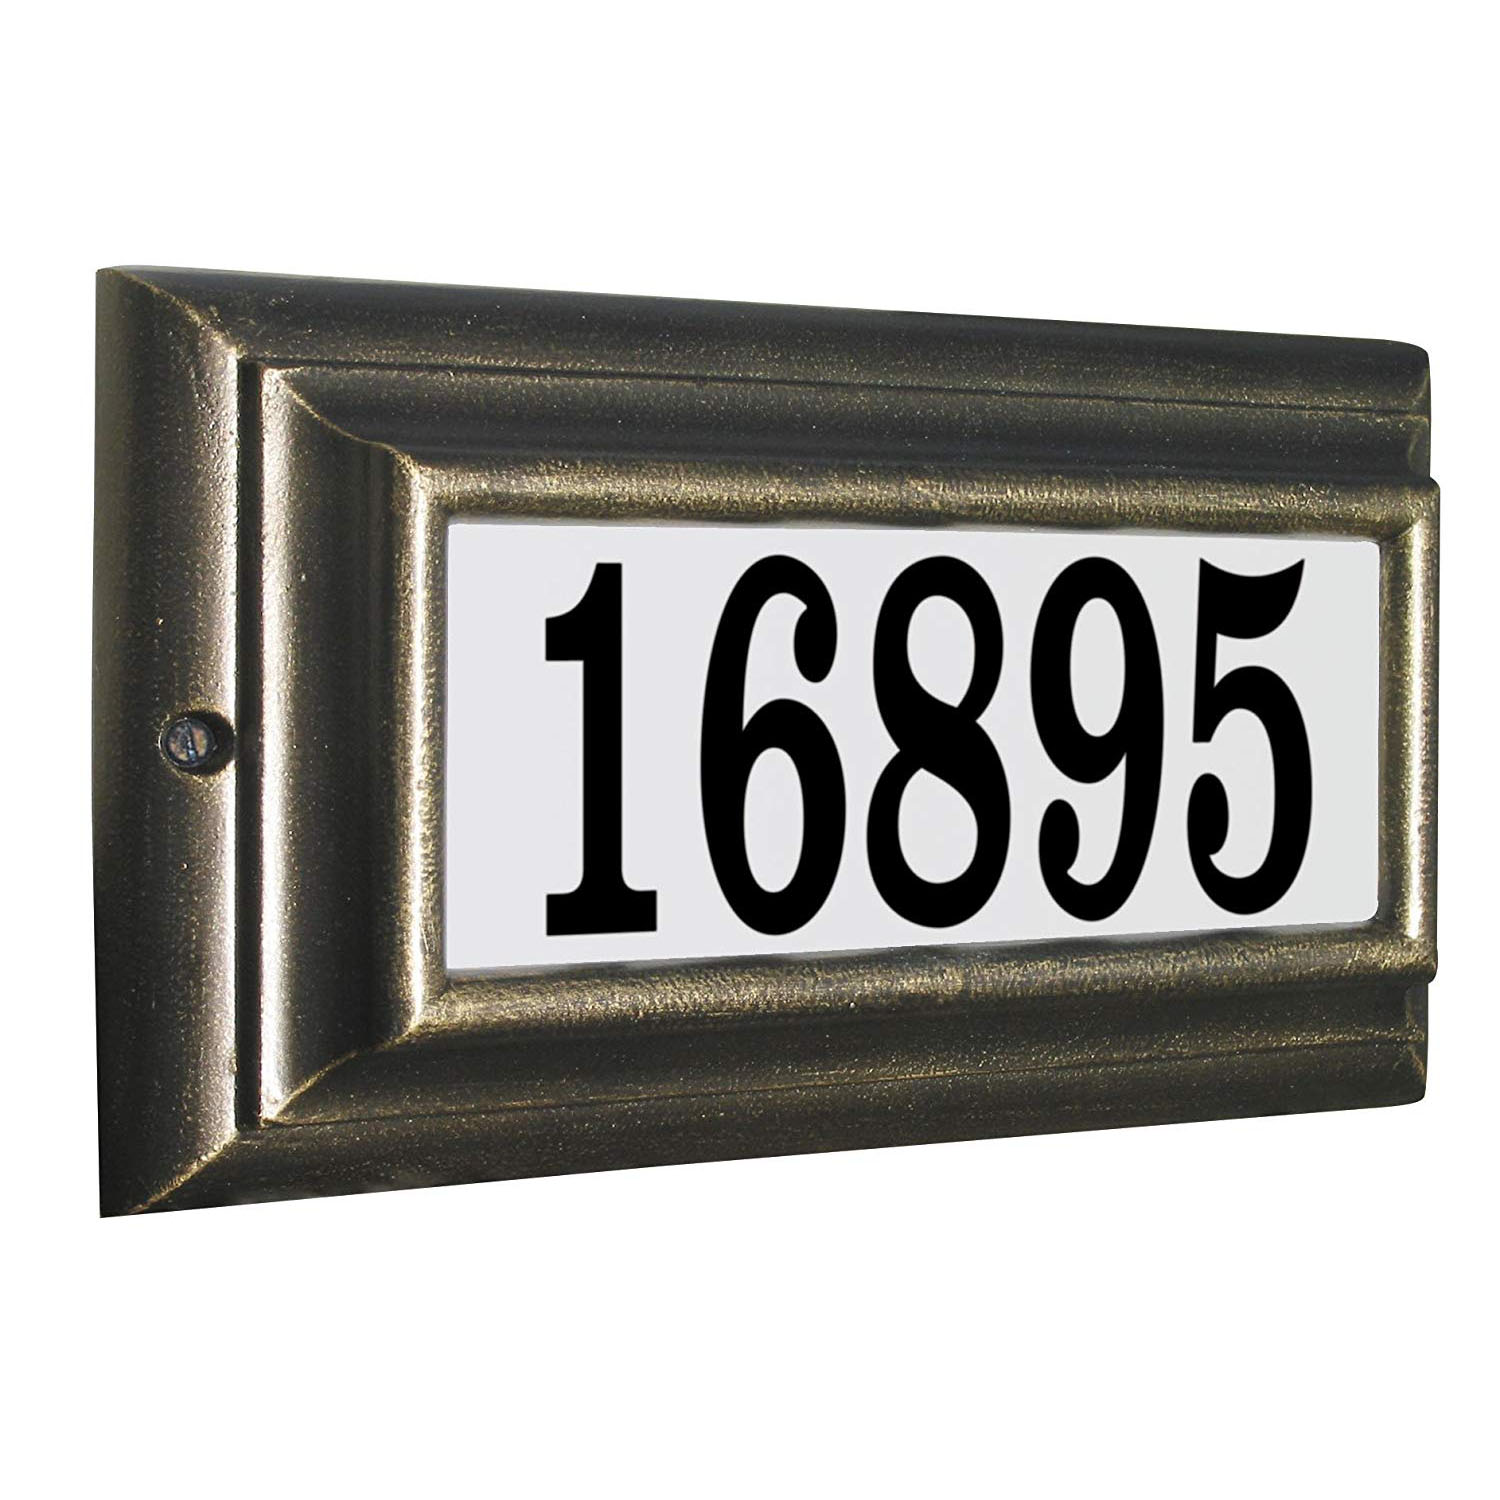 Edgewood Standard Lighted Address Plaque In French Bronze Frame Color